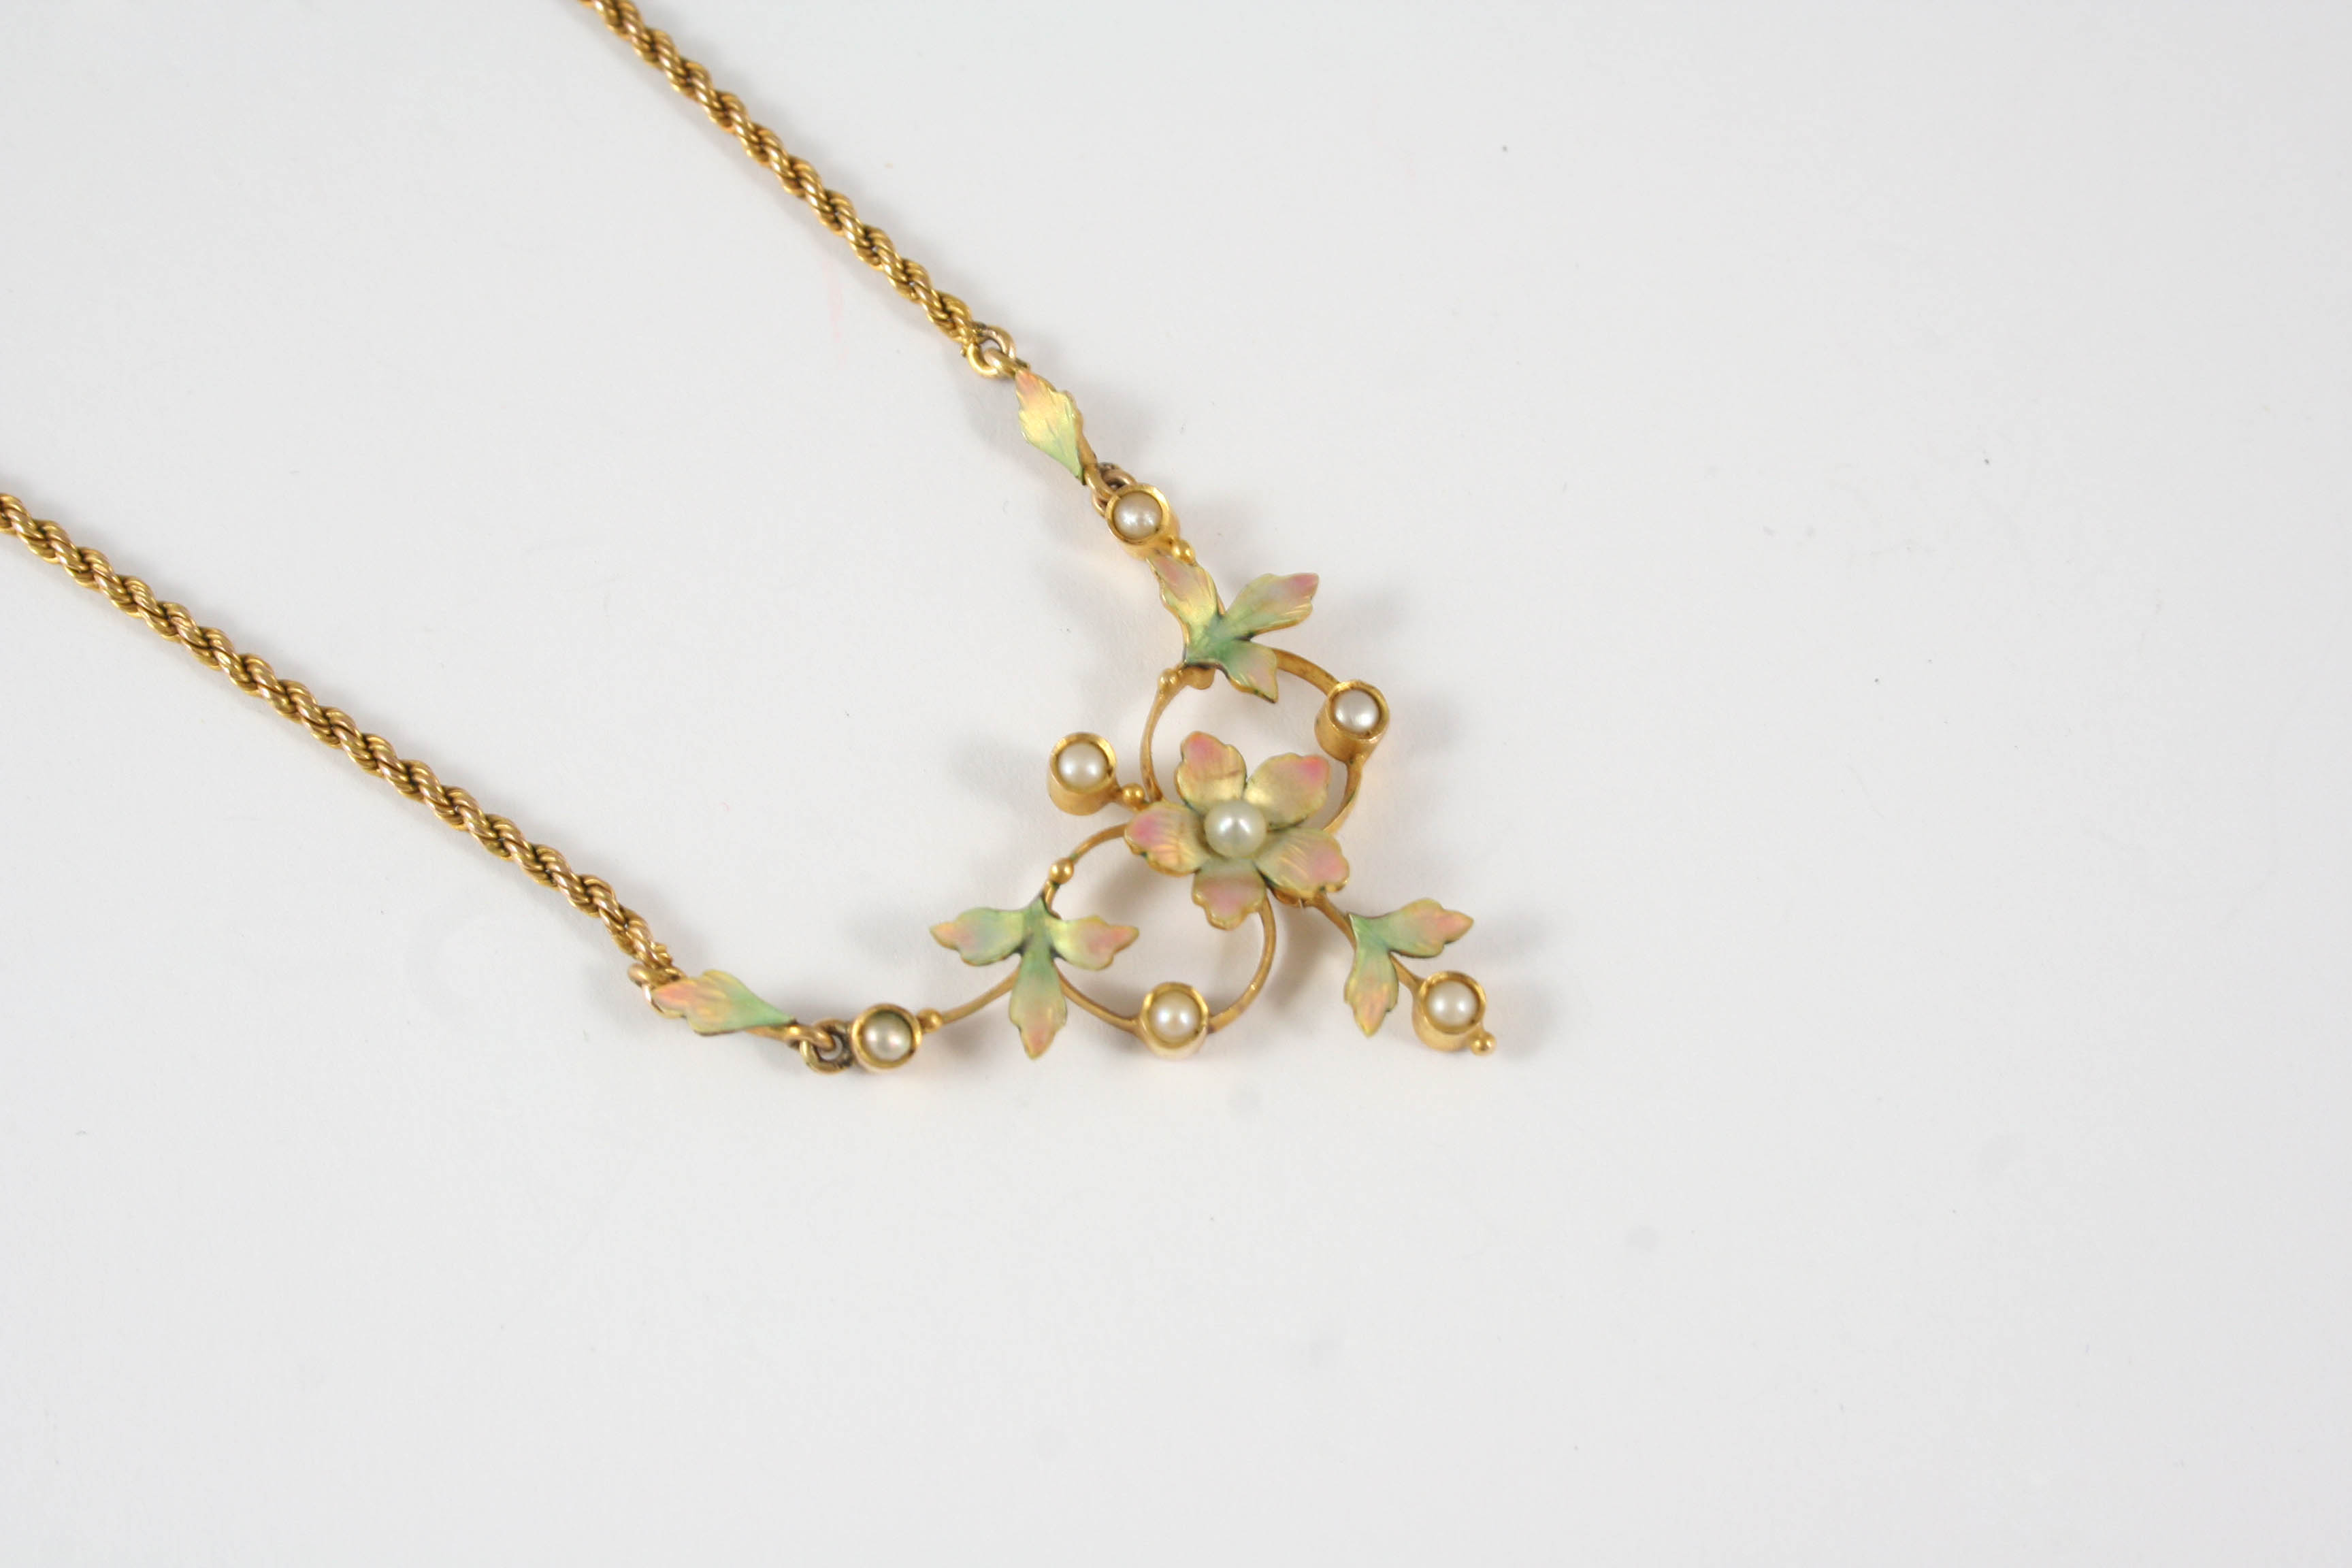 AN ENAMEL, PEARL AND GOLD NECKLACE the foliate necklace with enamel decoration and mounted with